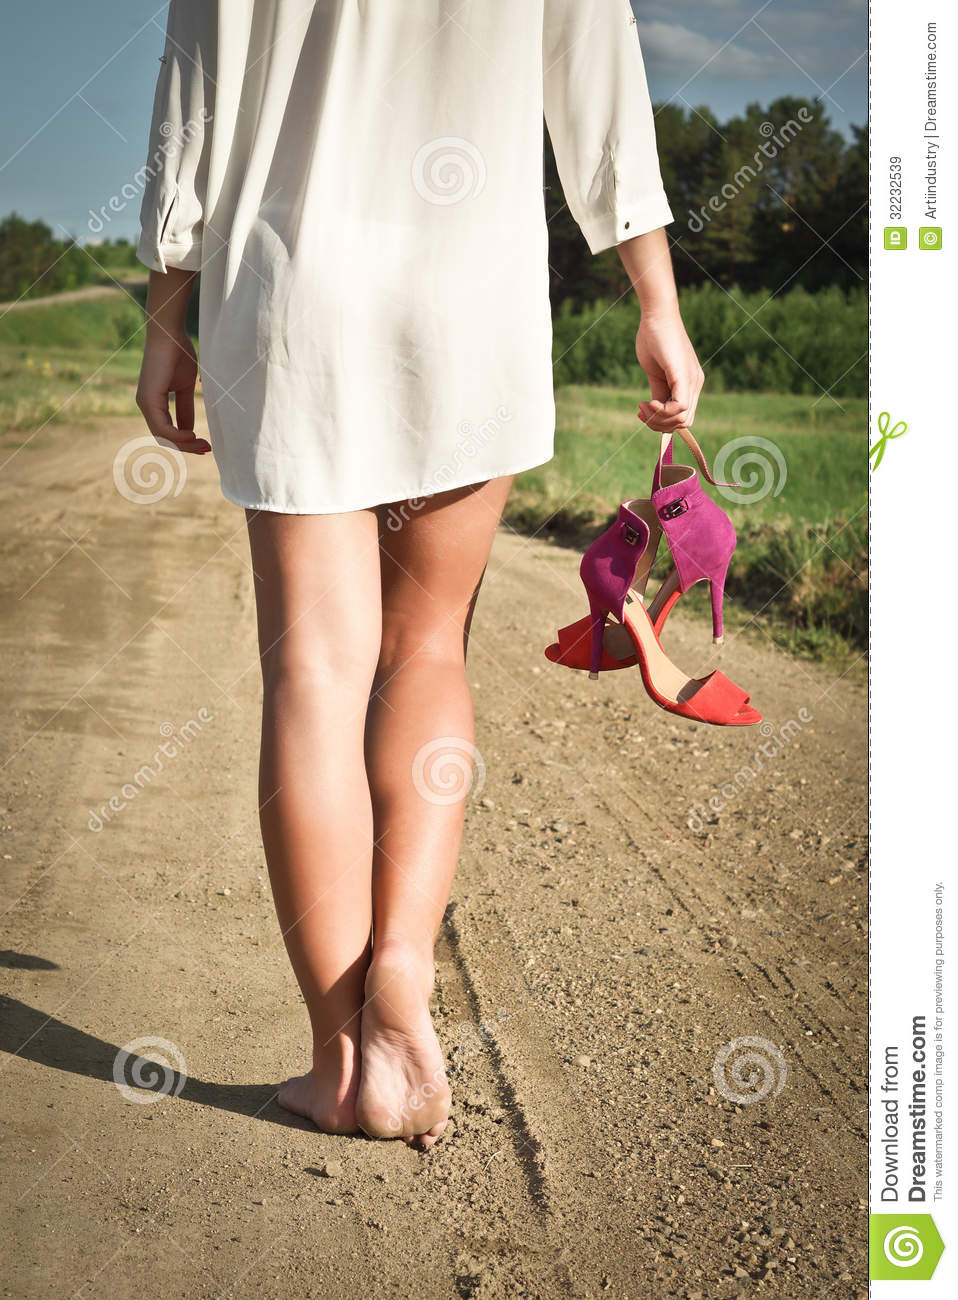 Going Barefoot Royalty Free Stock Images   Image  32232539